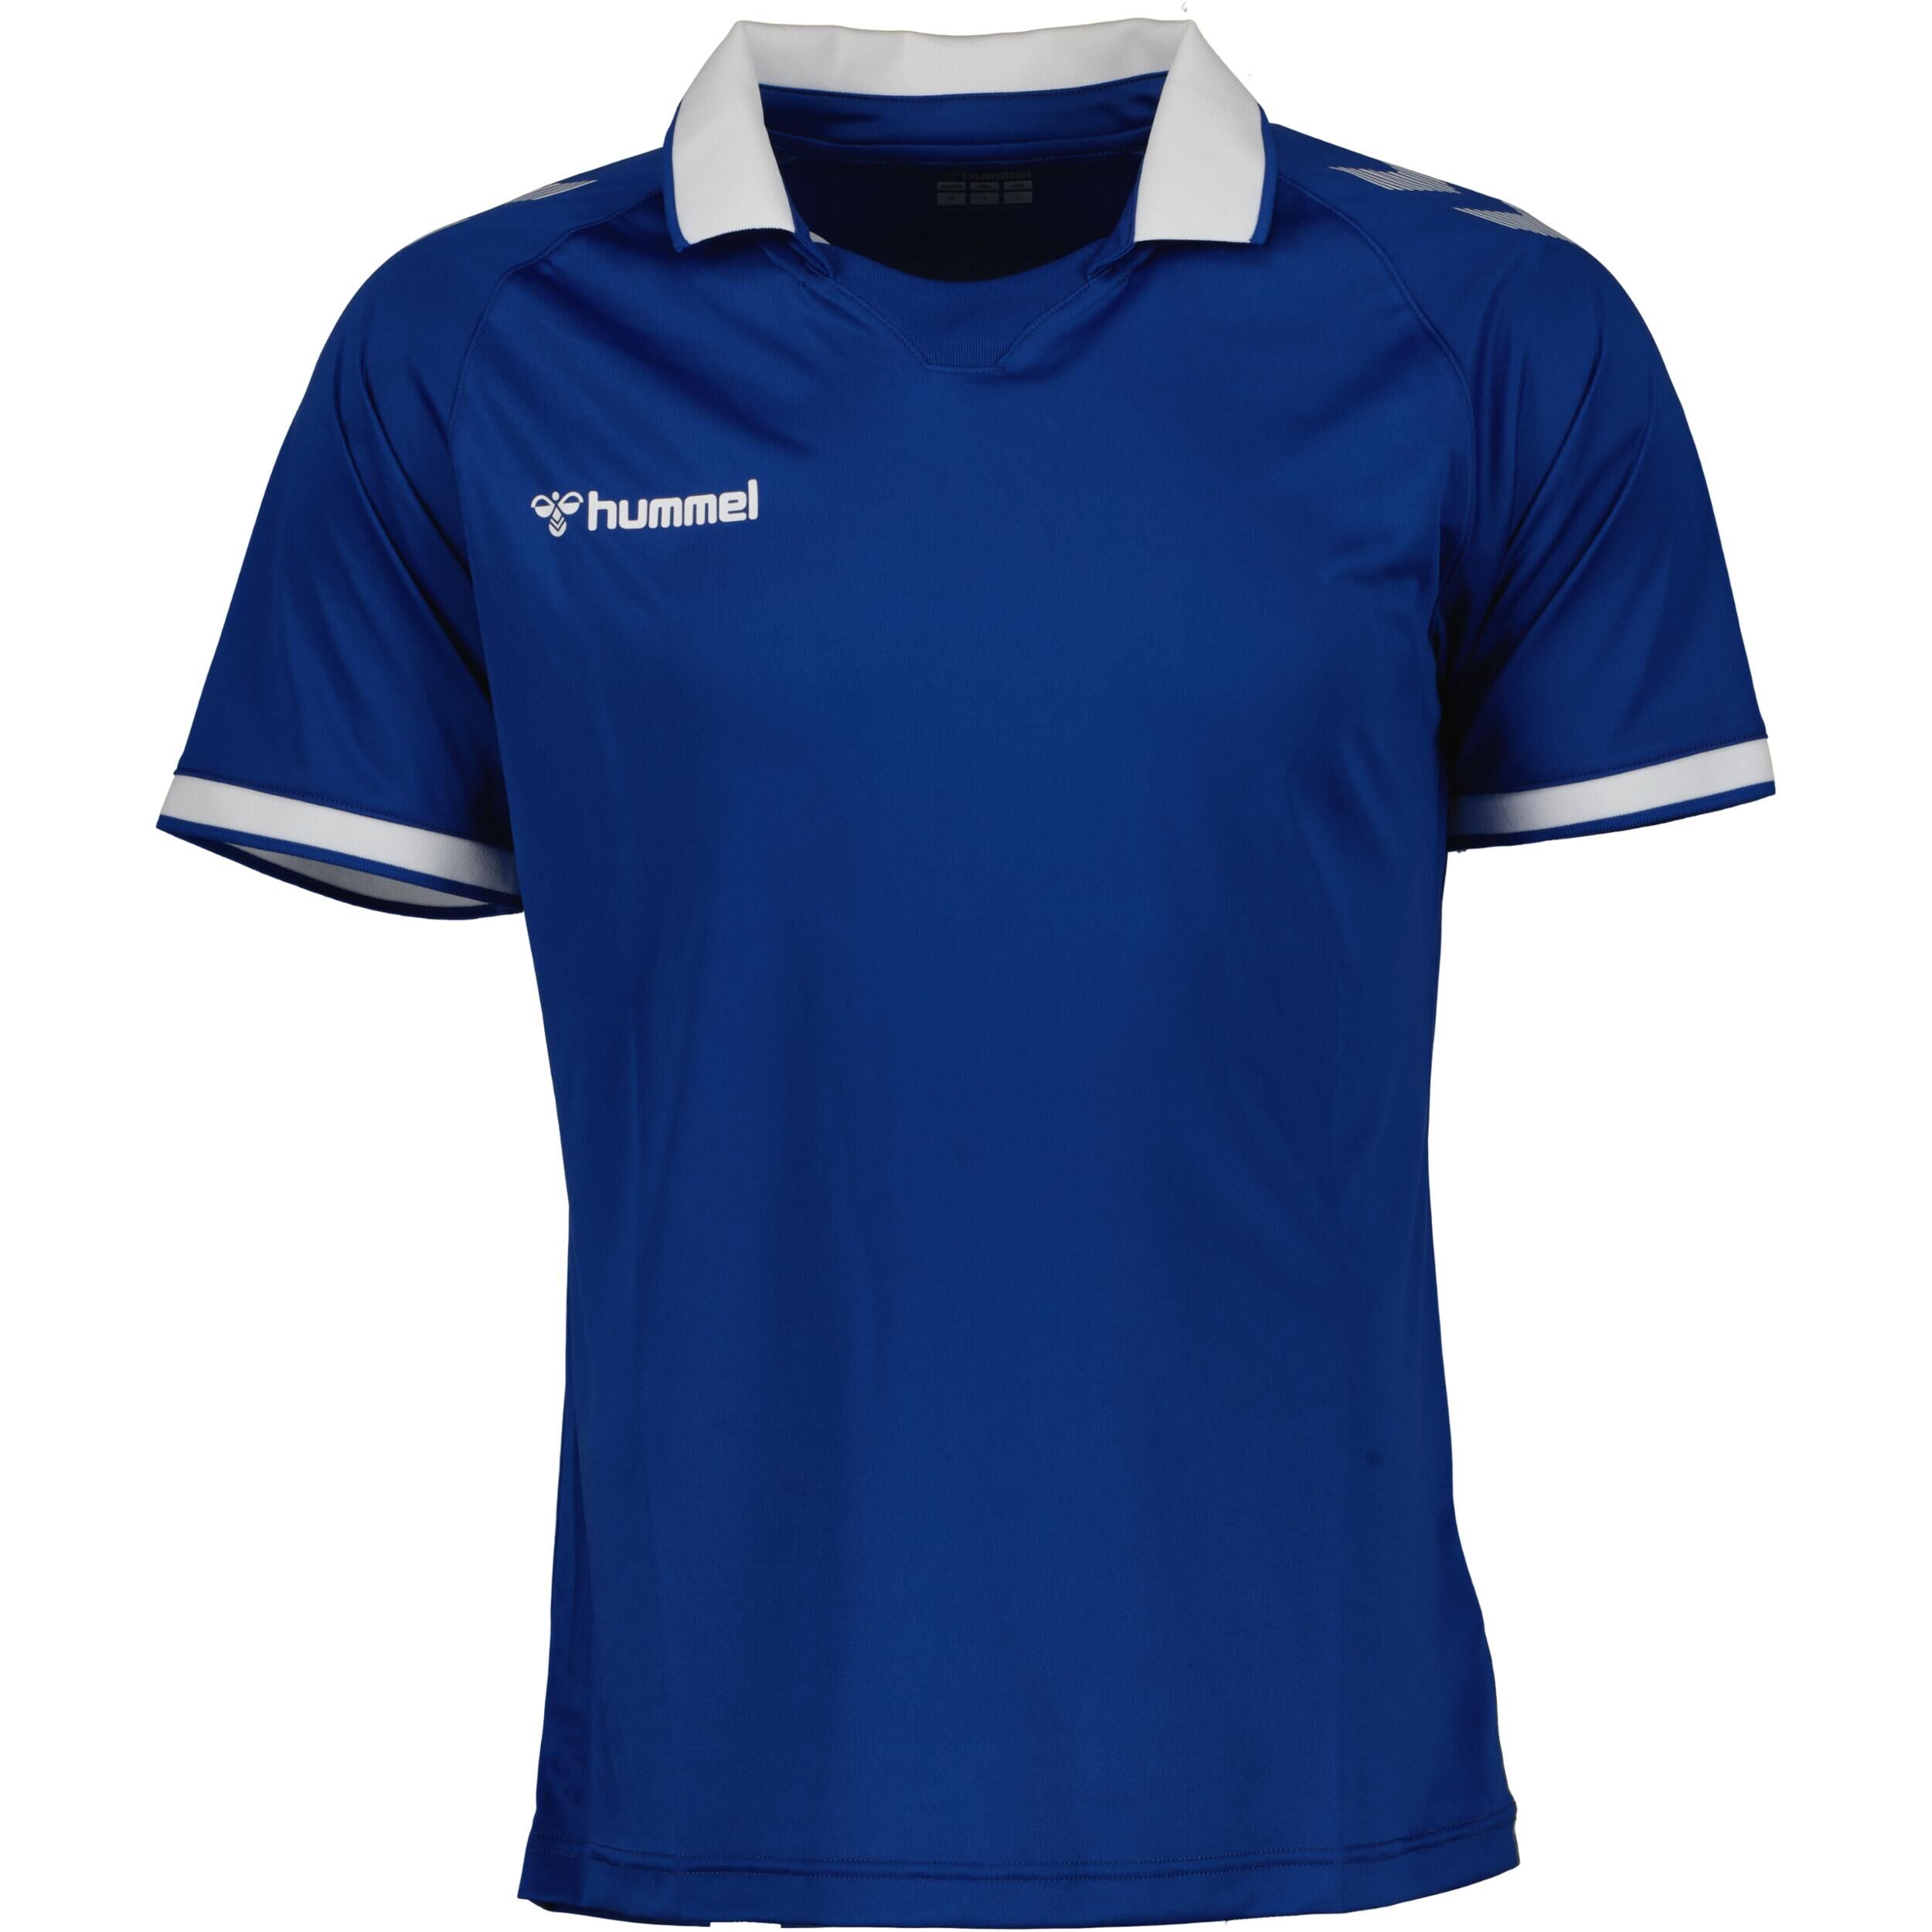 HUMMEL Impact jersey for juniors, great for football, in blue/white